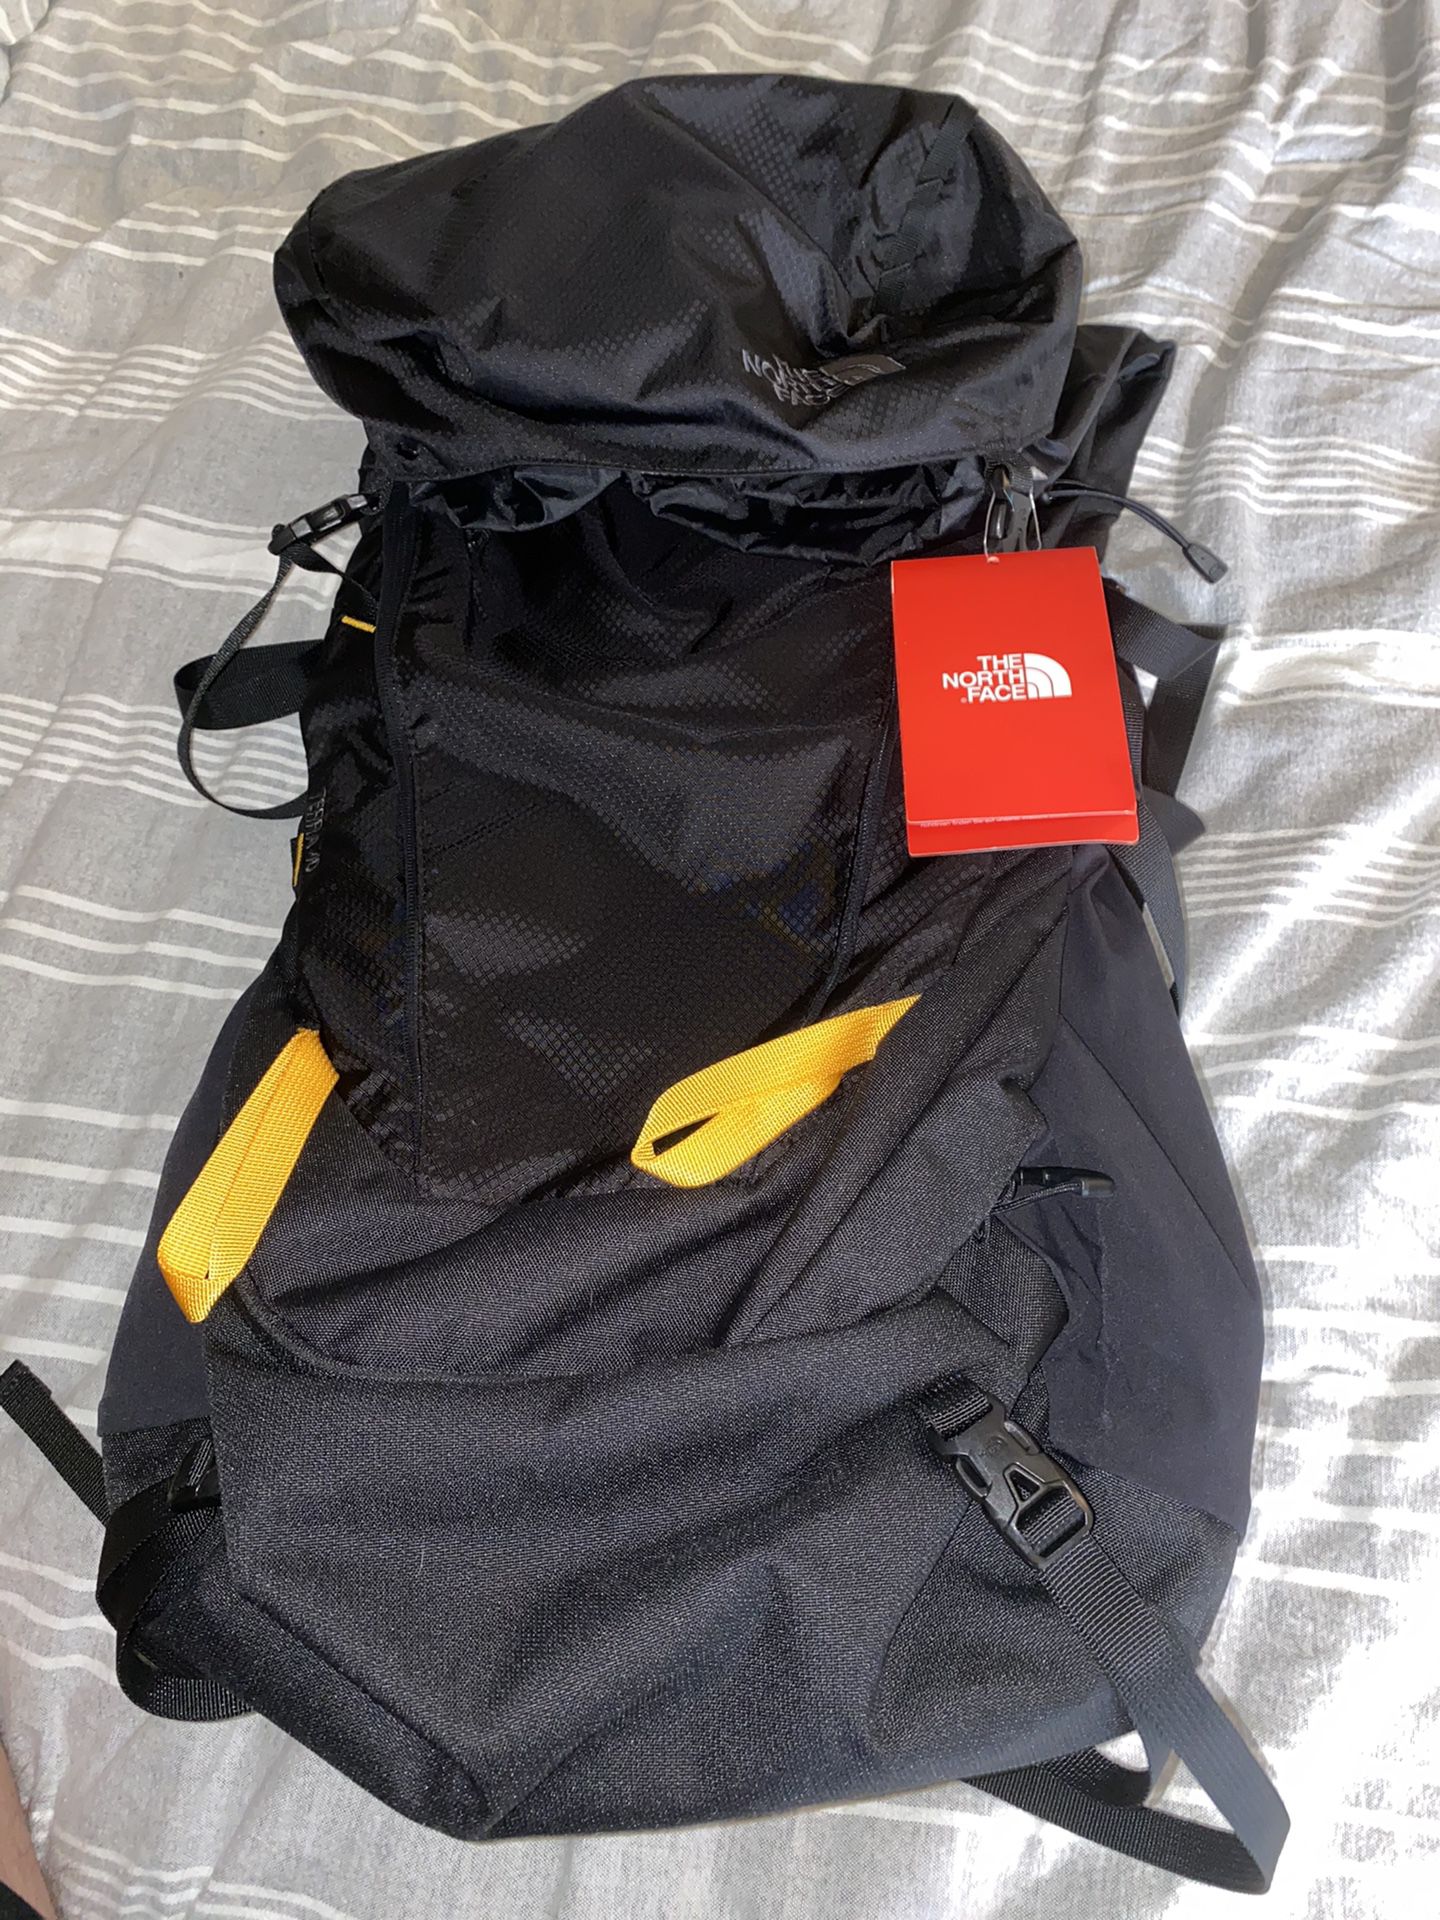 North face hiking backpack 40l